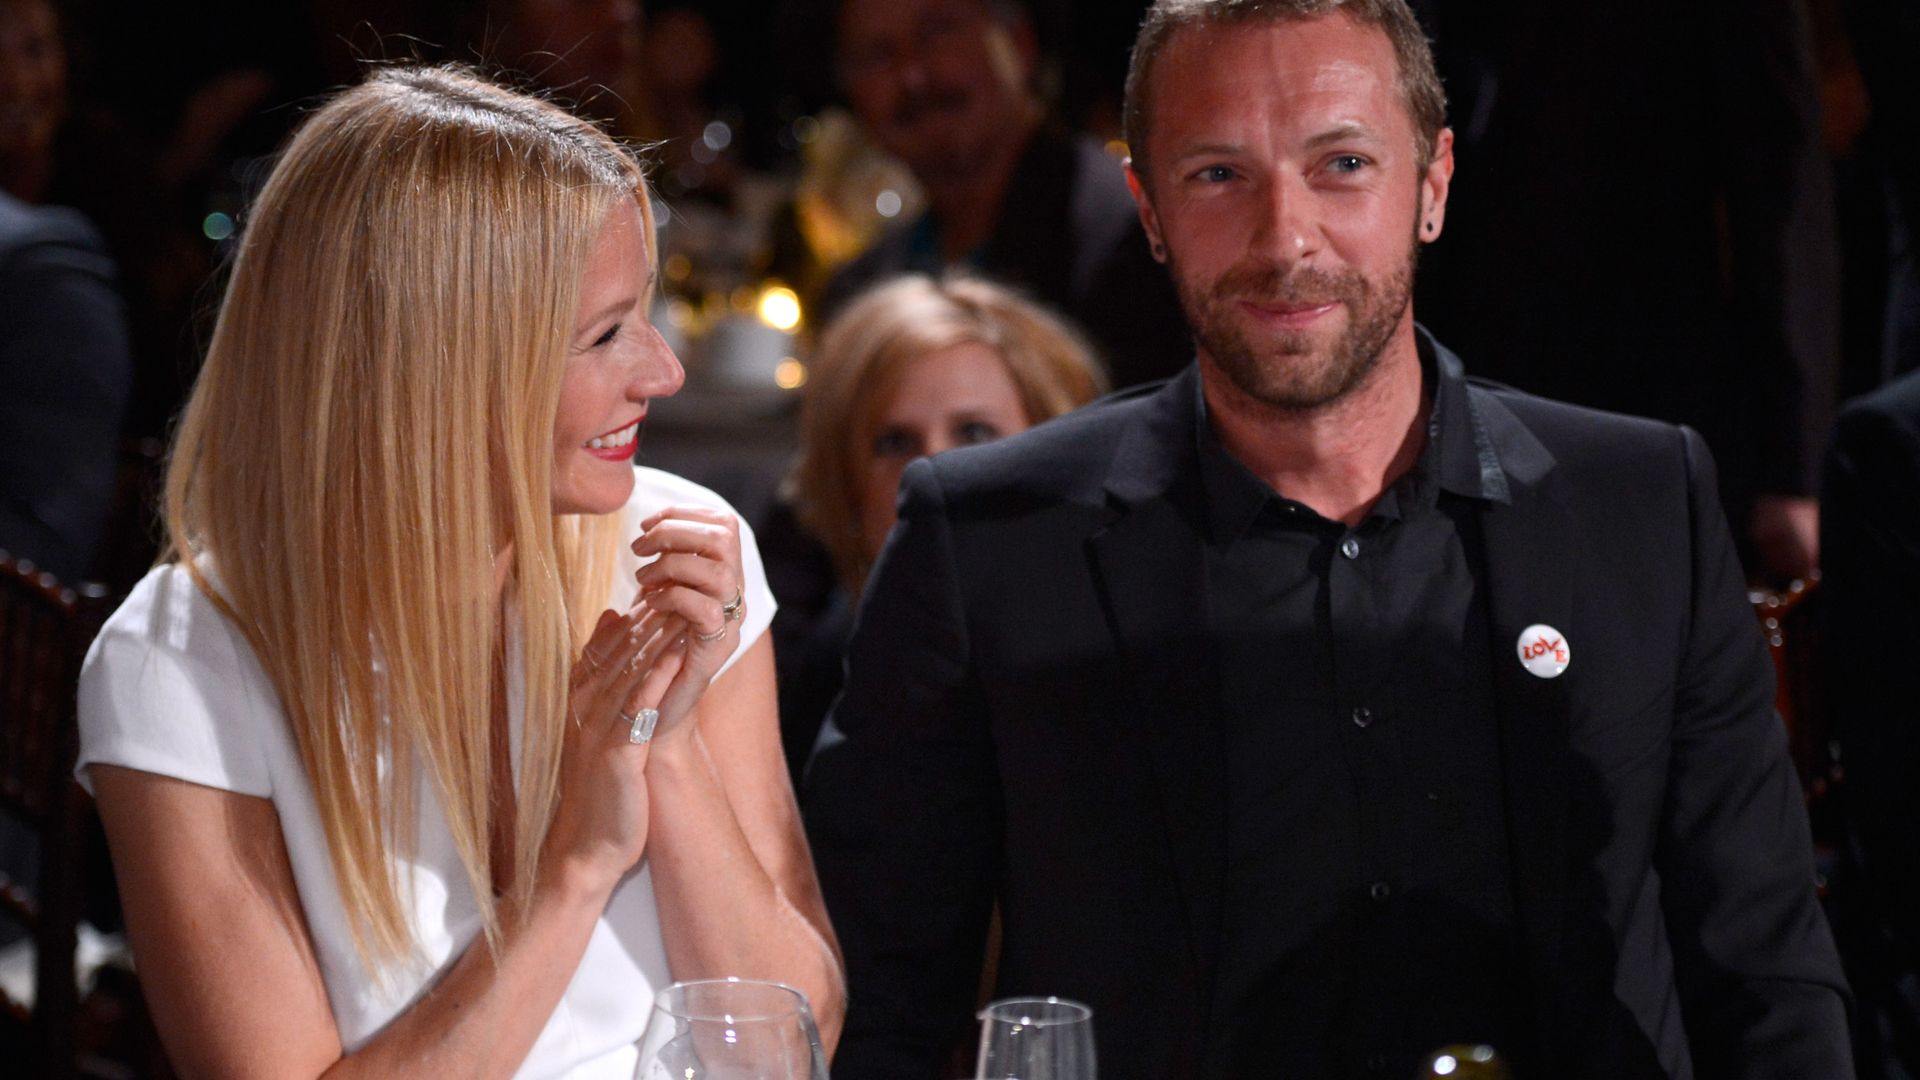 BEVERLY HILLS, CA - JANUARY 11:  Gwyneth Paltrow and Chris Martin attend the 3rd annual Sean Penn & Friends HELP HAITI HOME Gala benefiting J/P HRO presented by Giorgio Armani at Montage Beverly Hills on January 11, 2014 in Beverly Hills, California.  (Photo by Kevin Mazur/Getty Images for J/P Haitian Relief Organization)